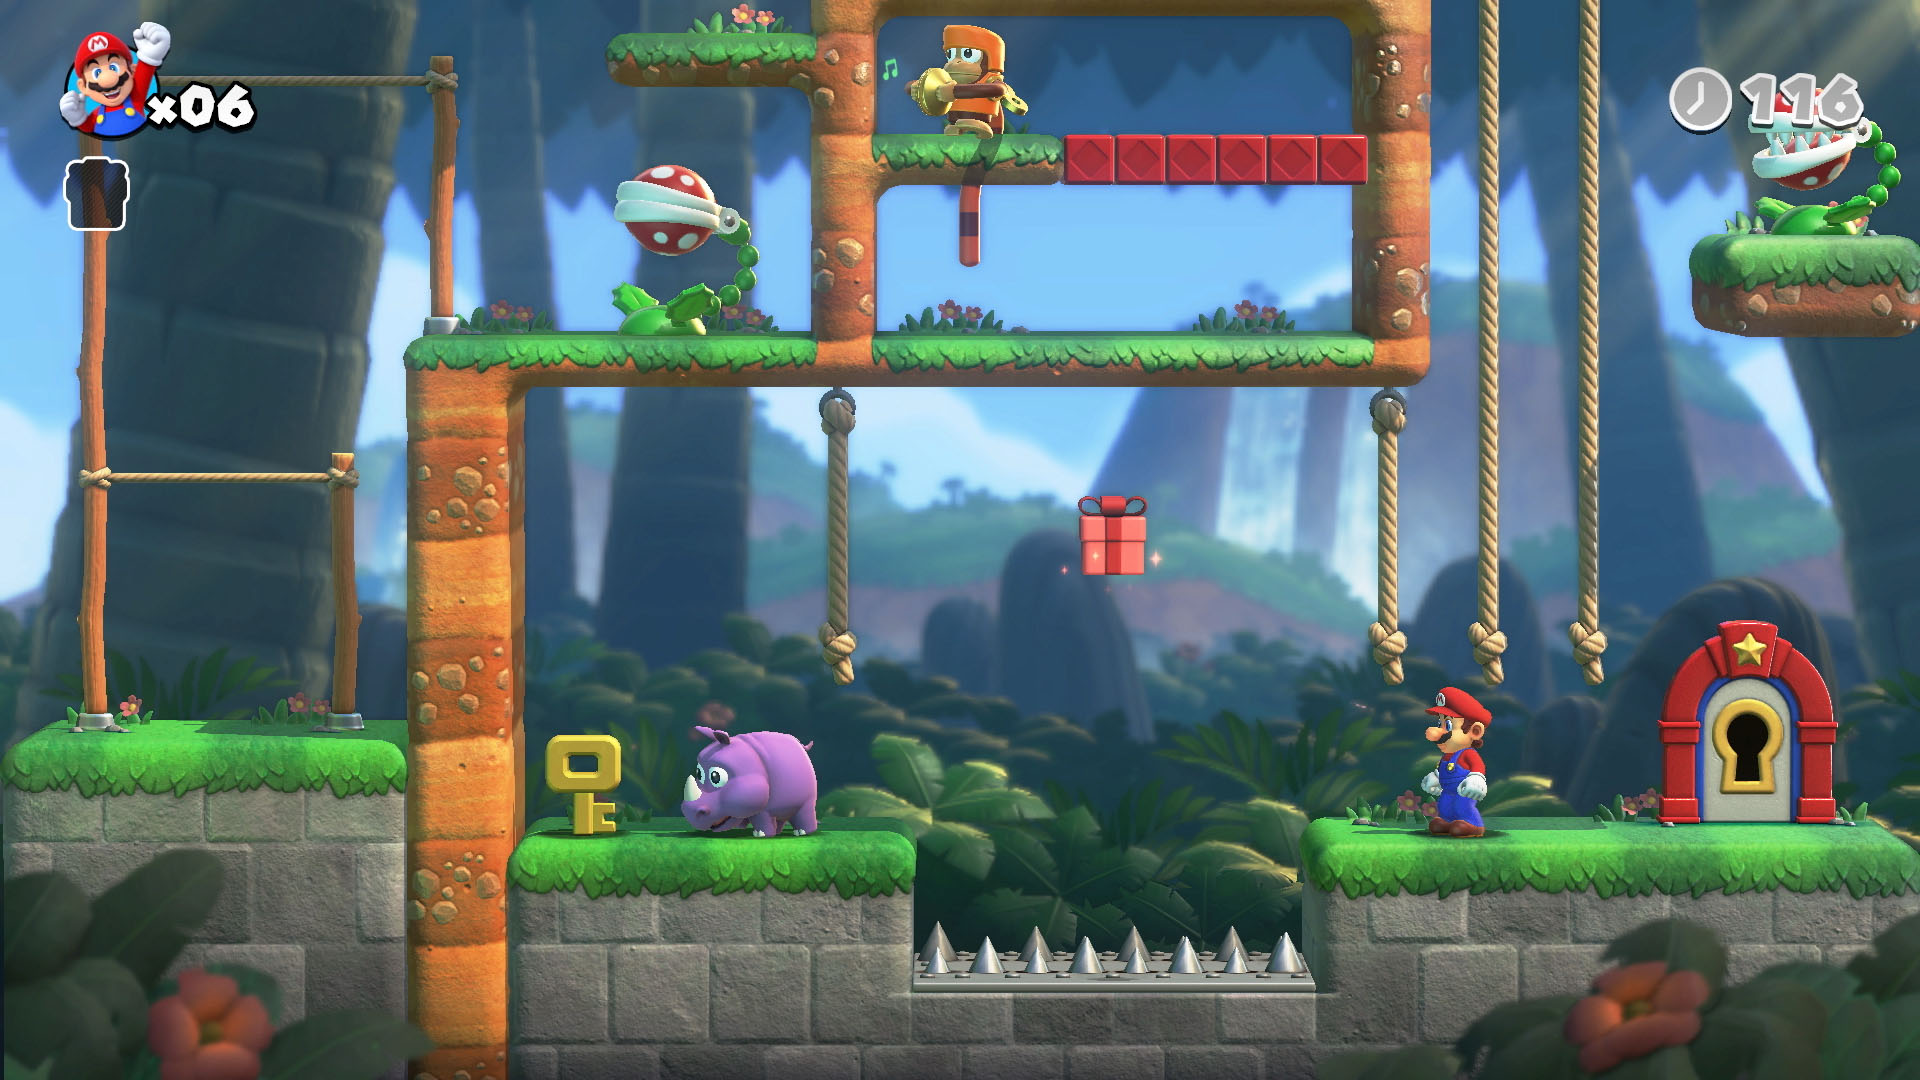 Mario vs. Donkey Kong Demo is Out Now, New Overview Trailer Released